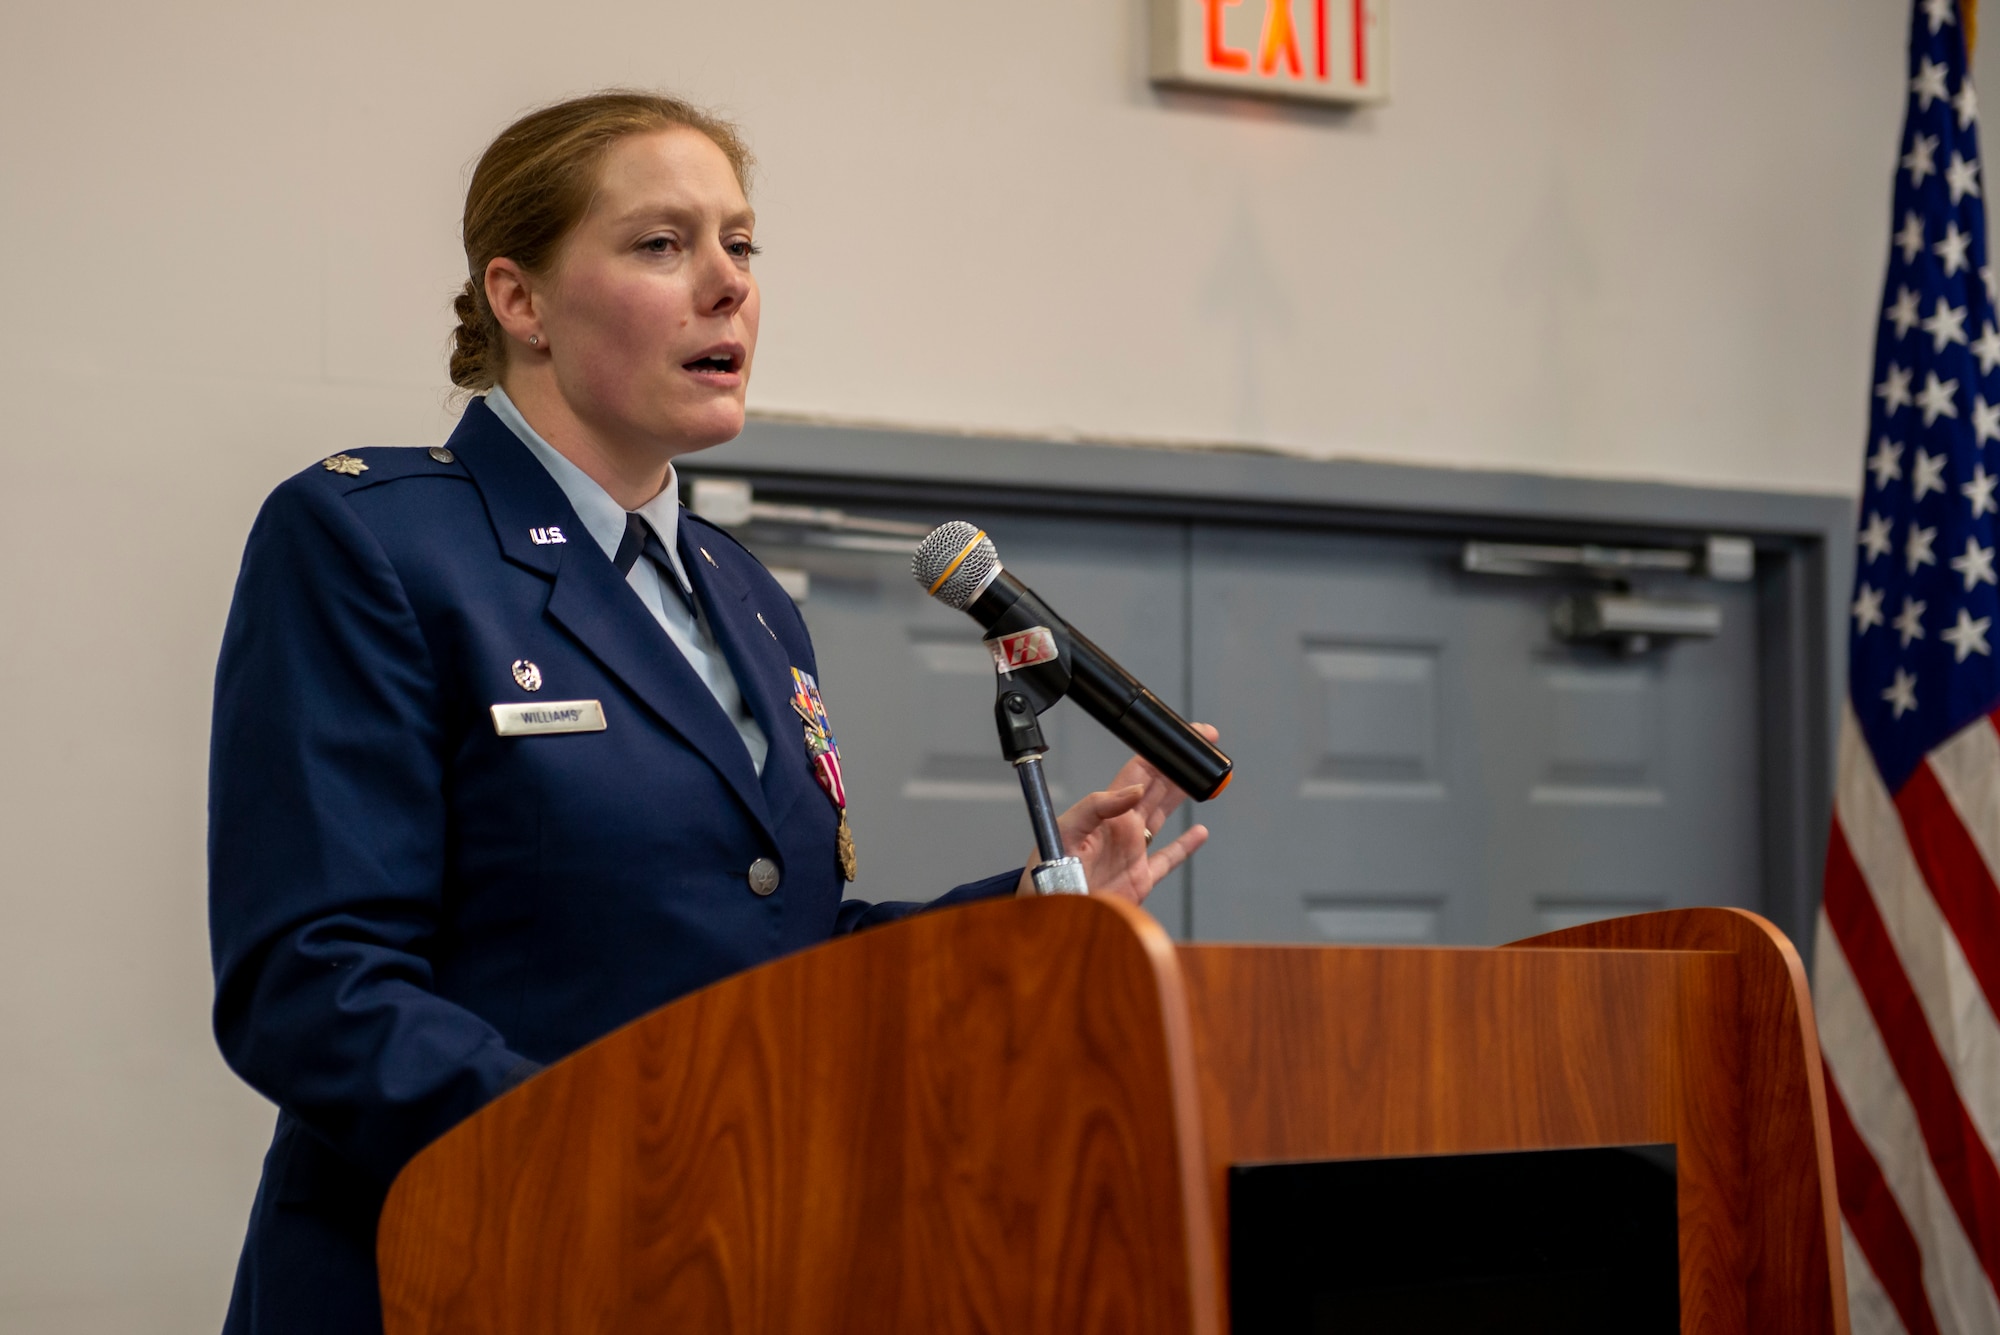 Lt. Col. Victoria Williams, outbound commander of the Integrated Command, Control, Computers, Communications, Intelligence, Surveillance, and Reconnaissance Analysis Squadron, gives remarks during the squadron’s change of command ceremony Aug. 4, 2022, in Dayton, Ohio. The C4ISR squadron produces predictive all-source intelligence for the operational, acquisition, and policy-making communities on the integrated C4ISR capabilities of foreign air, air defense, ballistic missiles, space and counterspace forces.